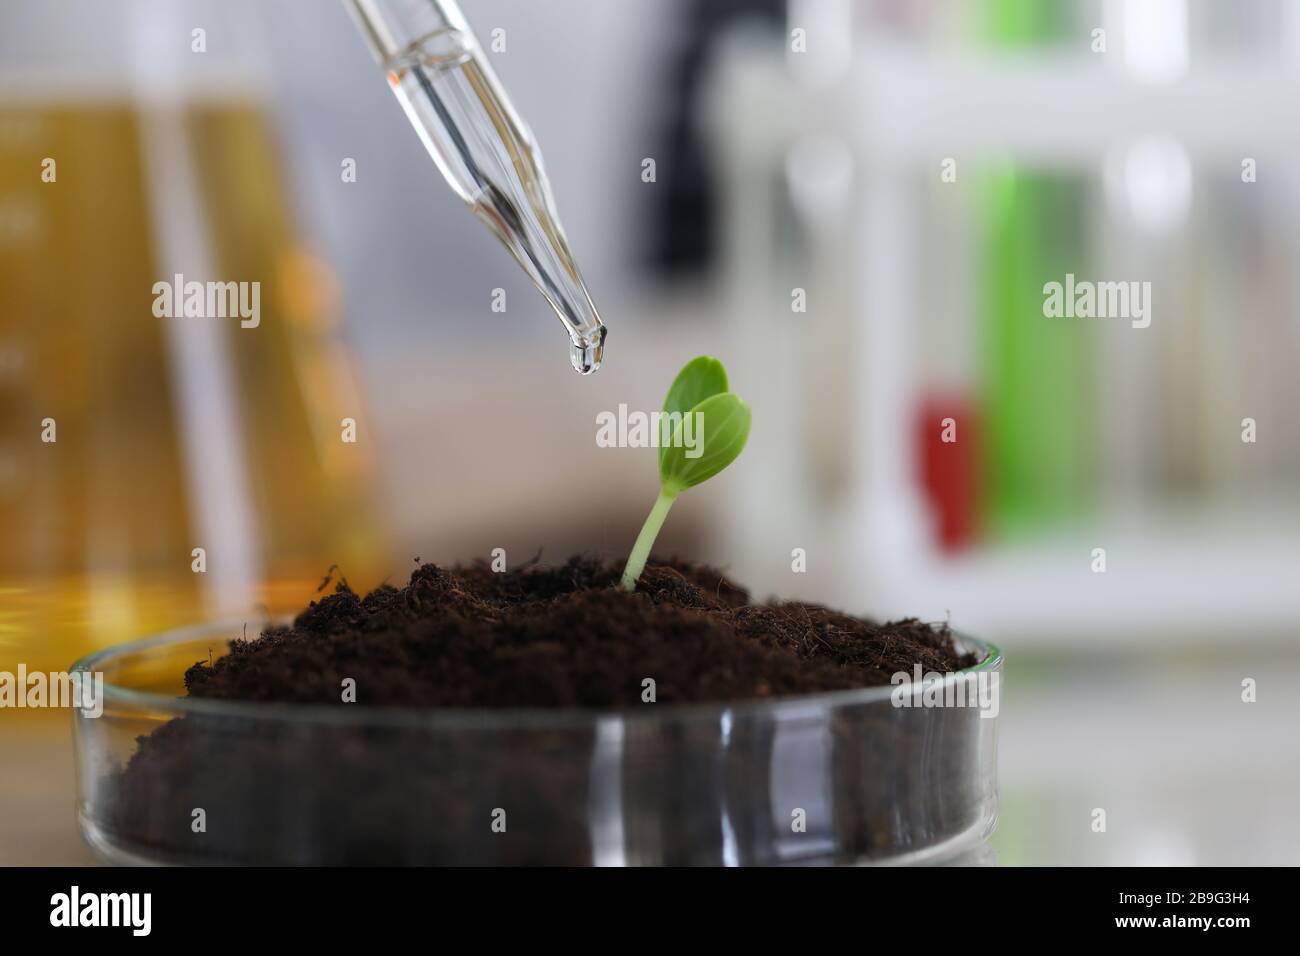 Plant growing in greenhouse conditions Stock Photo